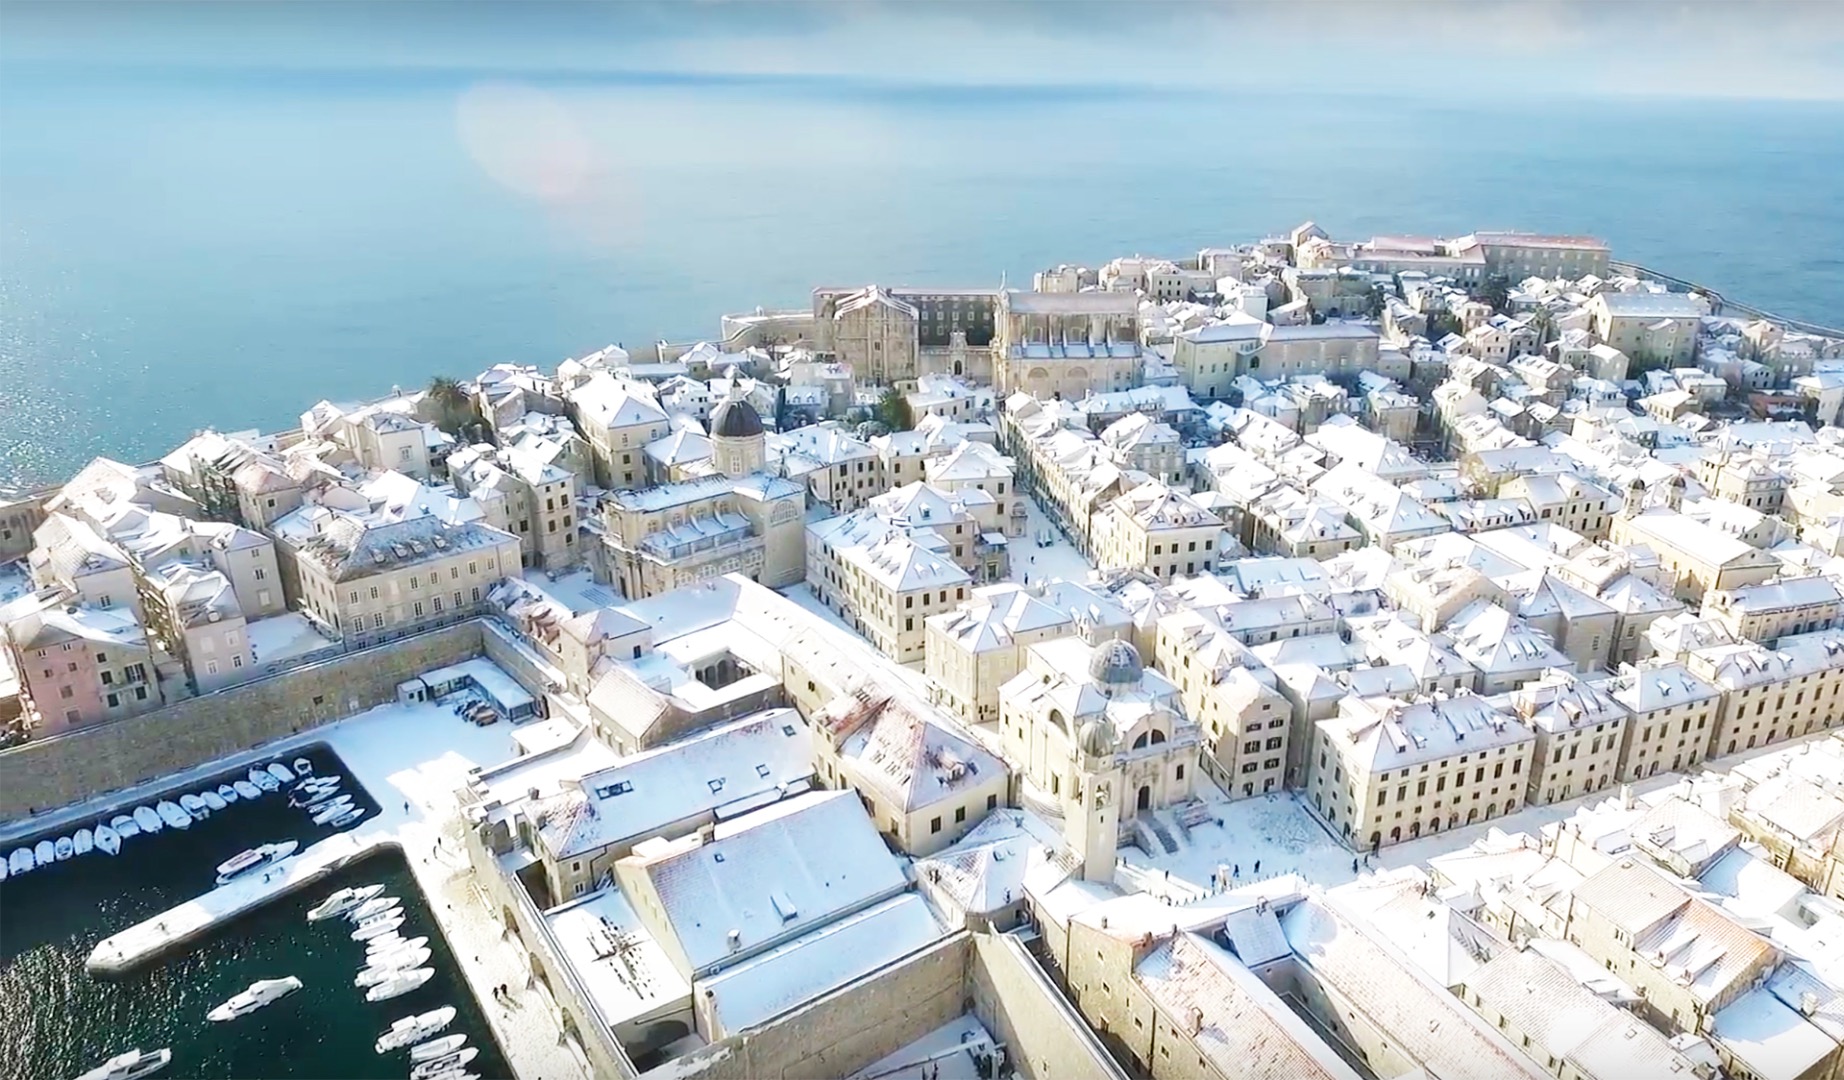 Snow video that will take your breath away